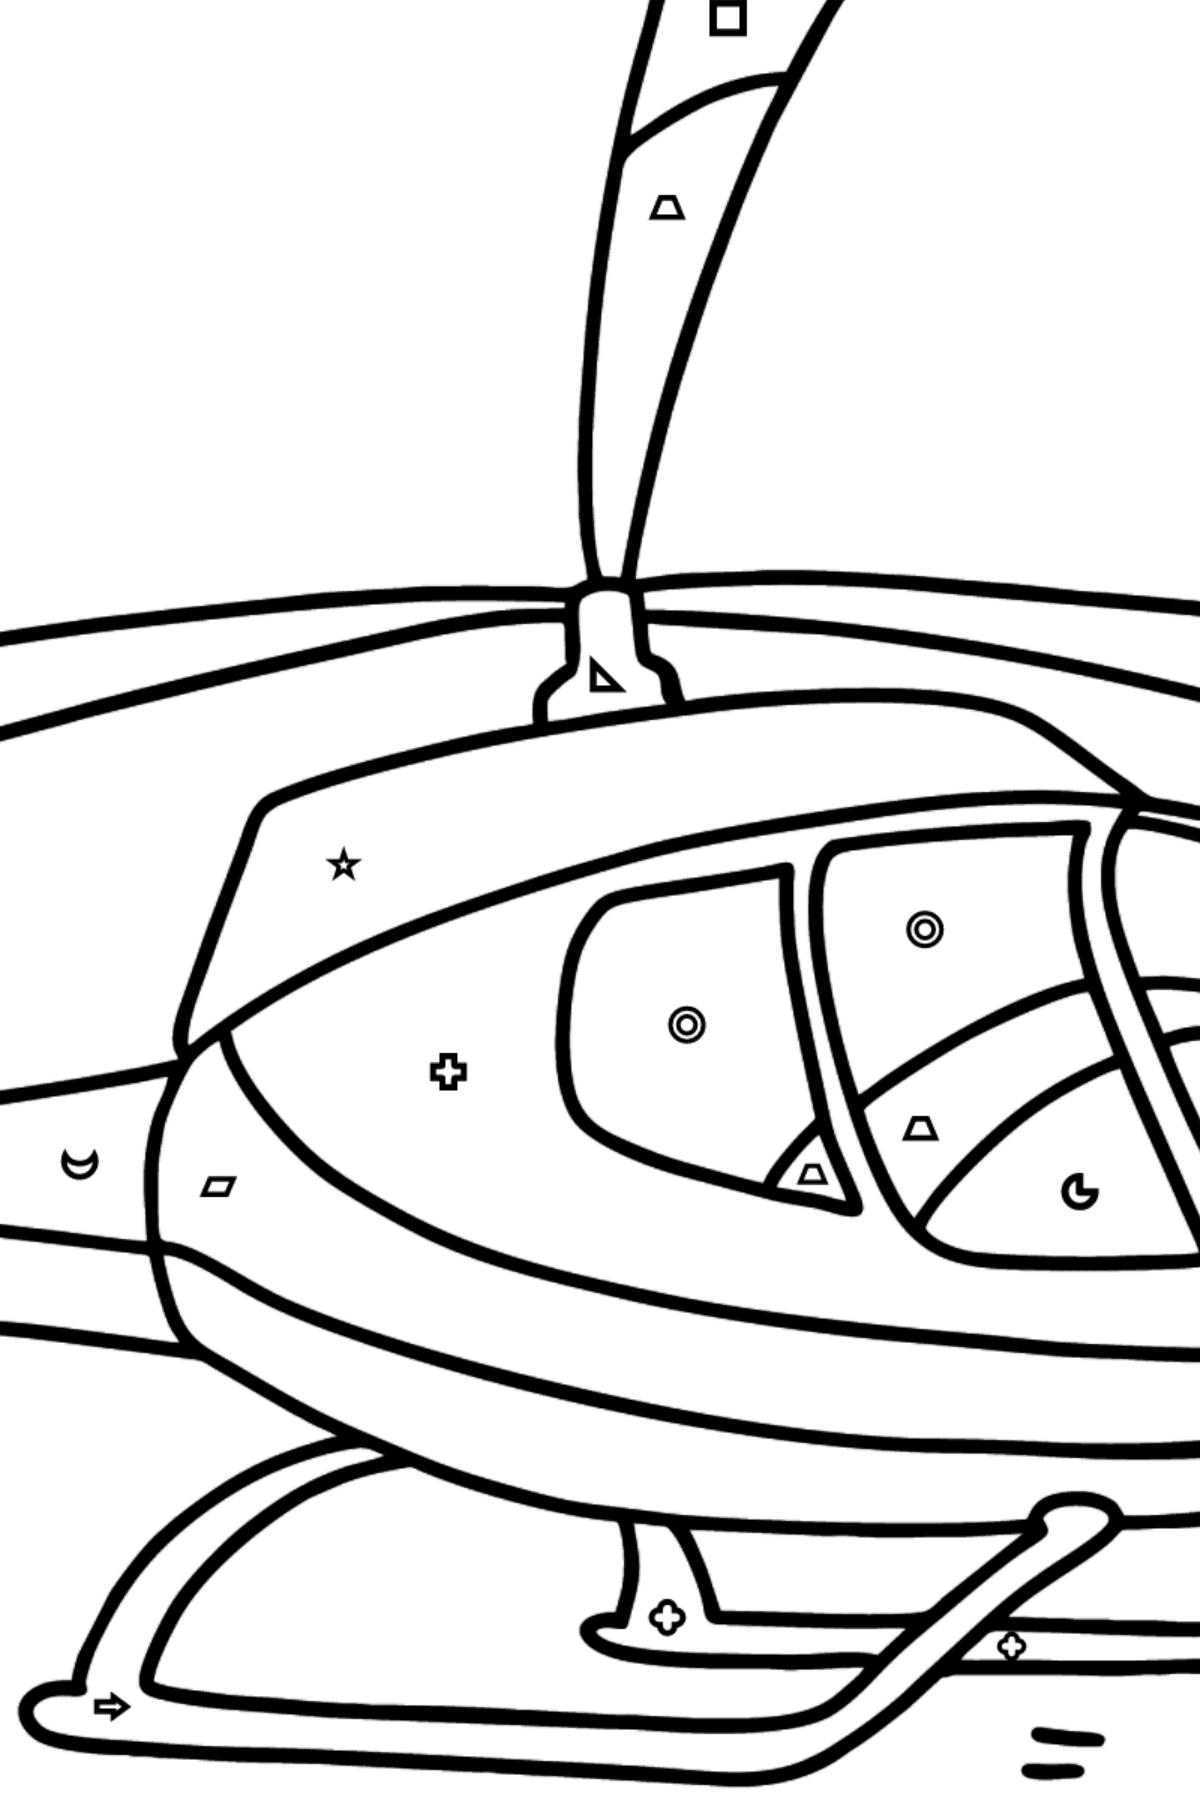 Beautiful Helicopter coloring page - Coloring by Geometric Shapes for Kids